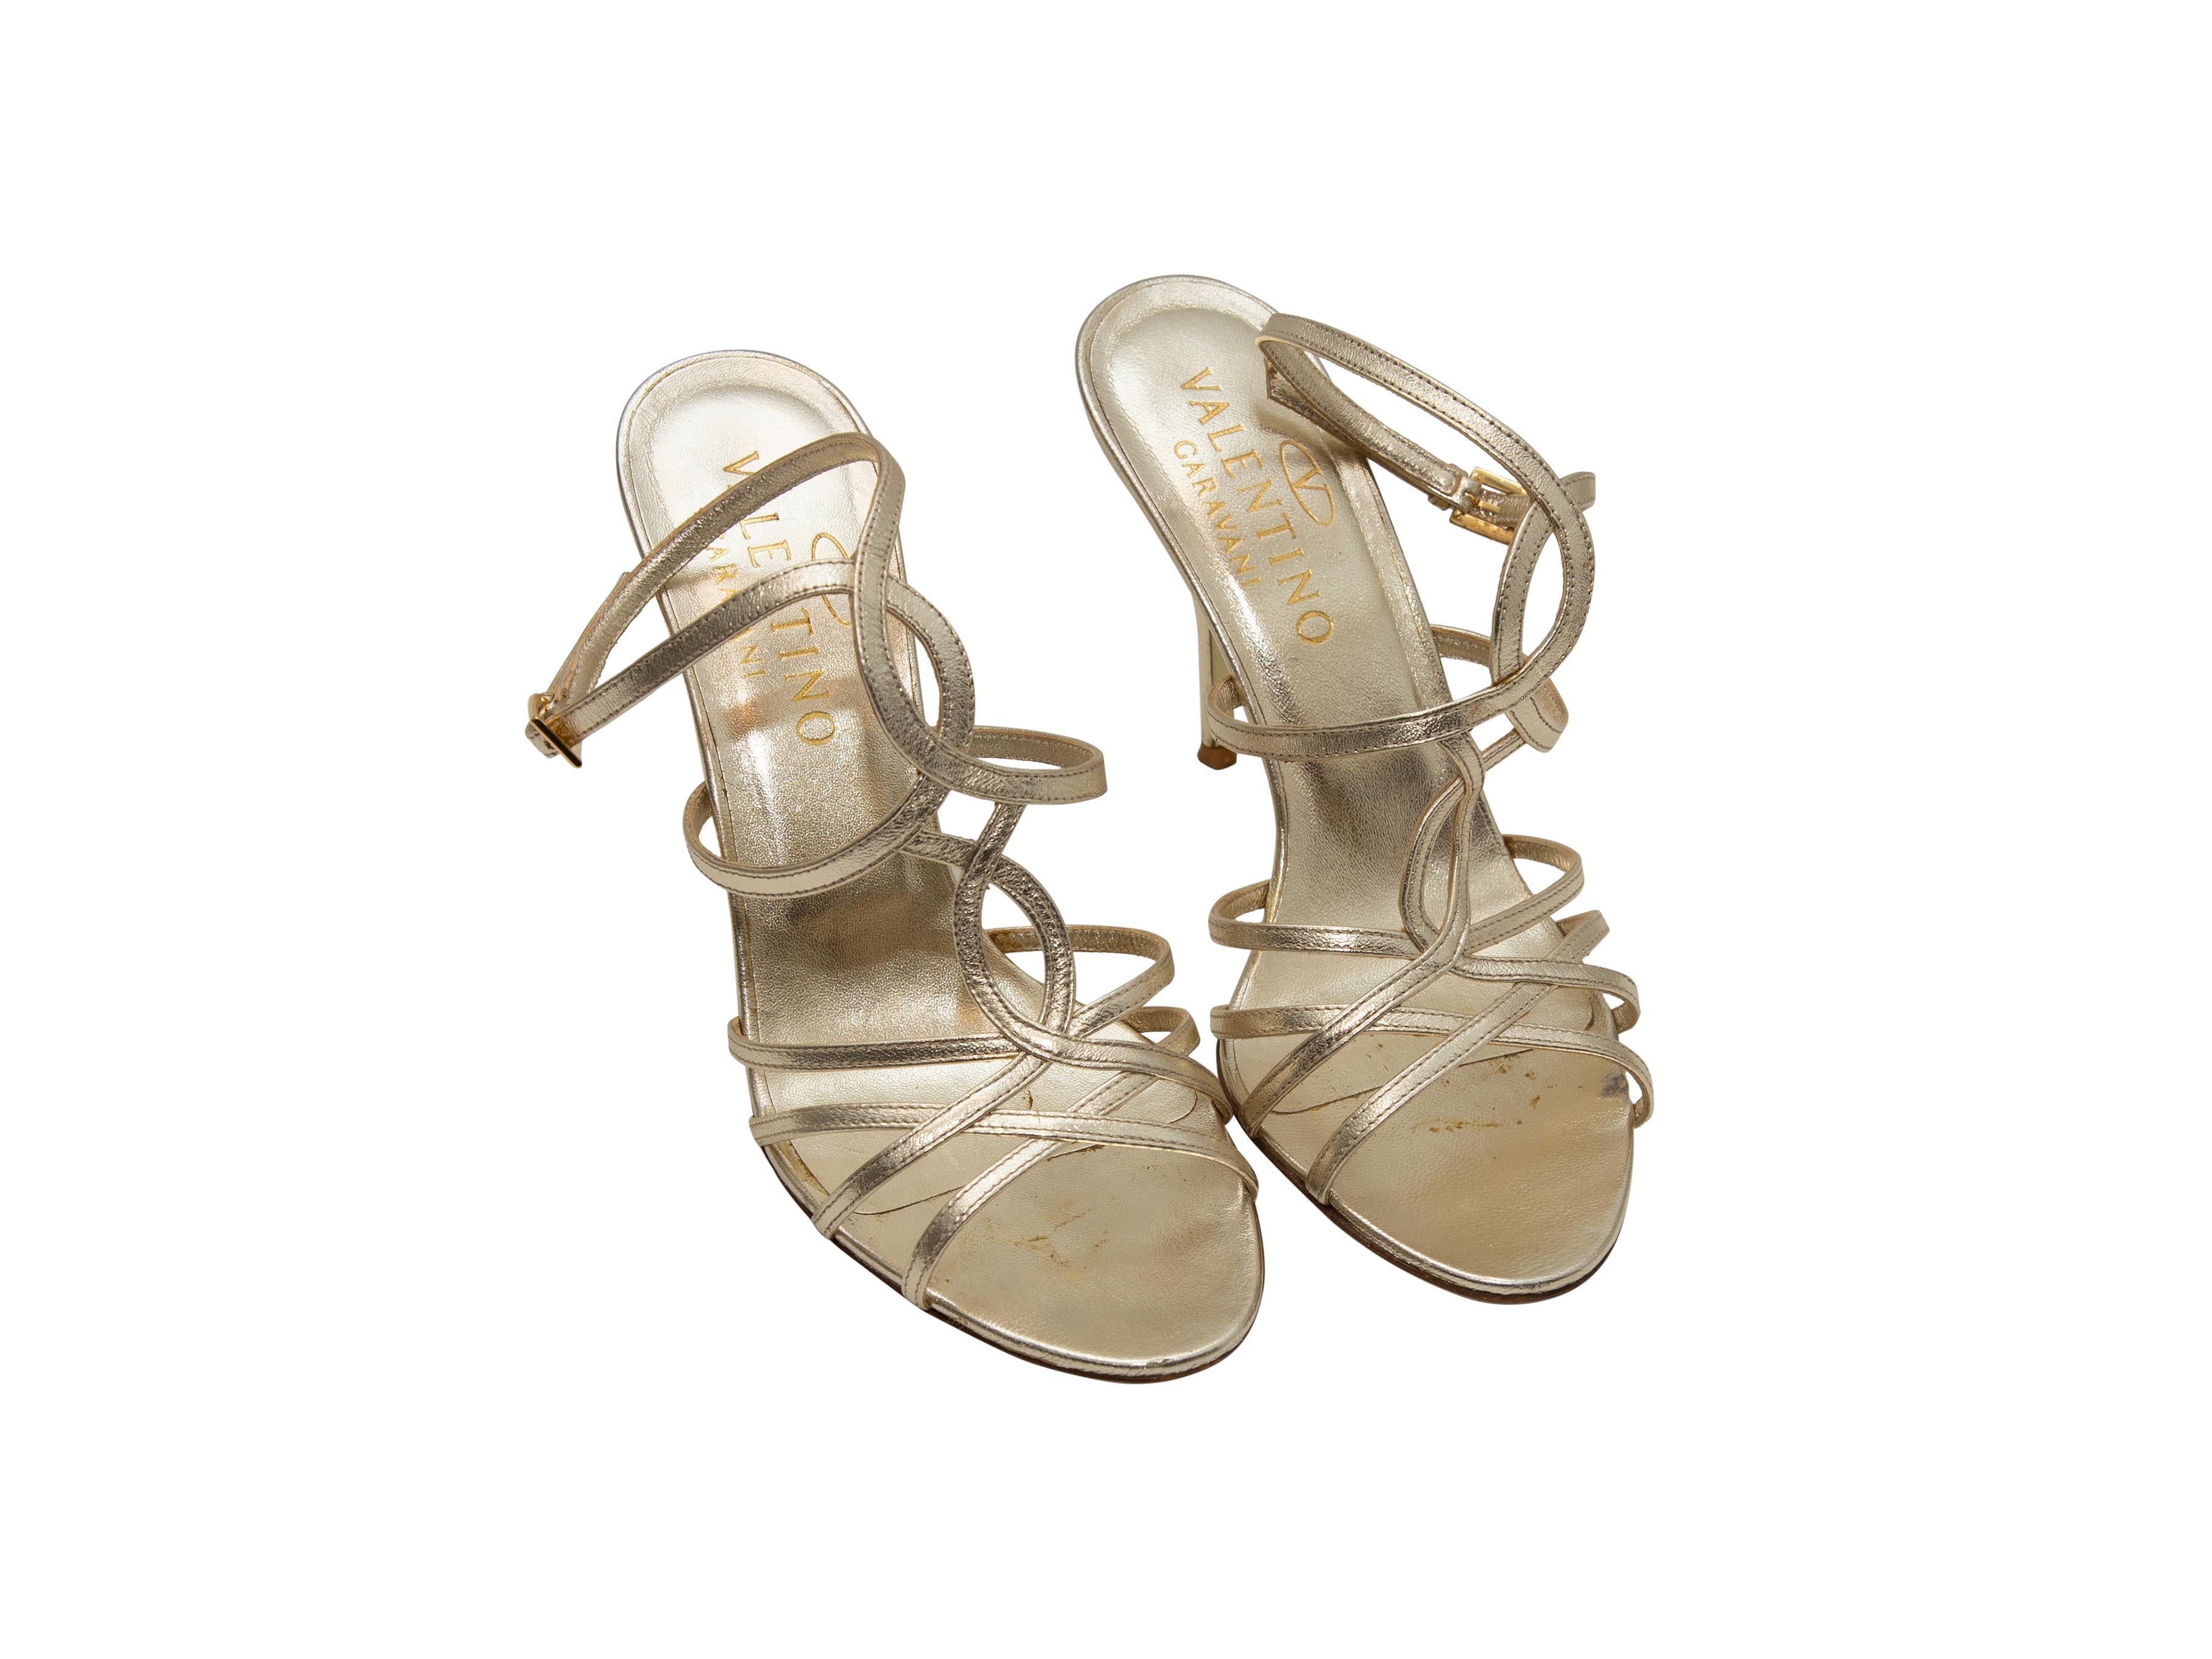 Product details: Gold metallic leather strappy heeled sandals by Valentino. Gold-tone buckle closures at ankle straps. Designer size 36.5. 4